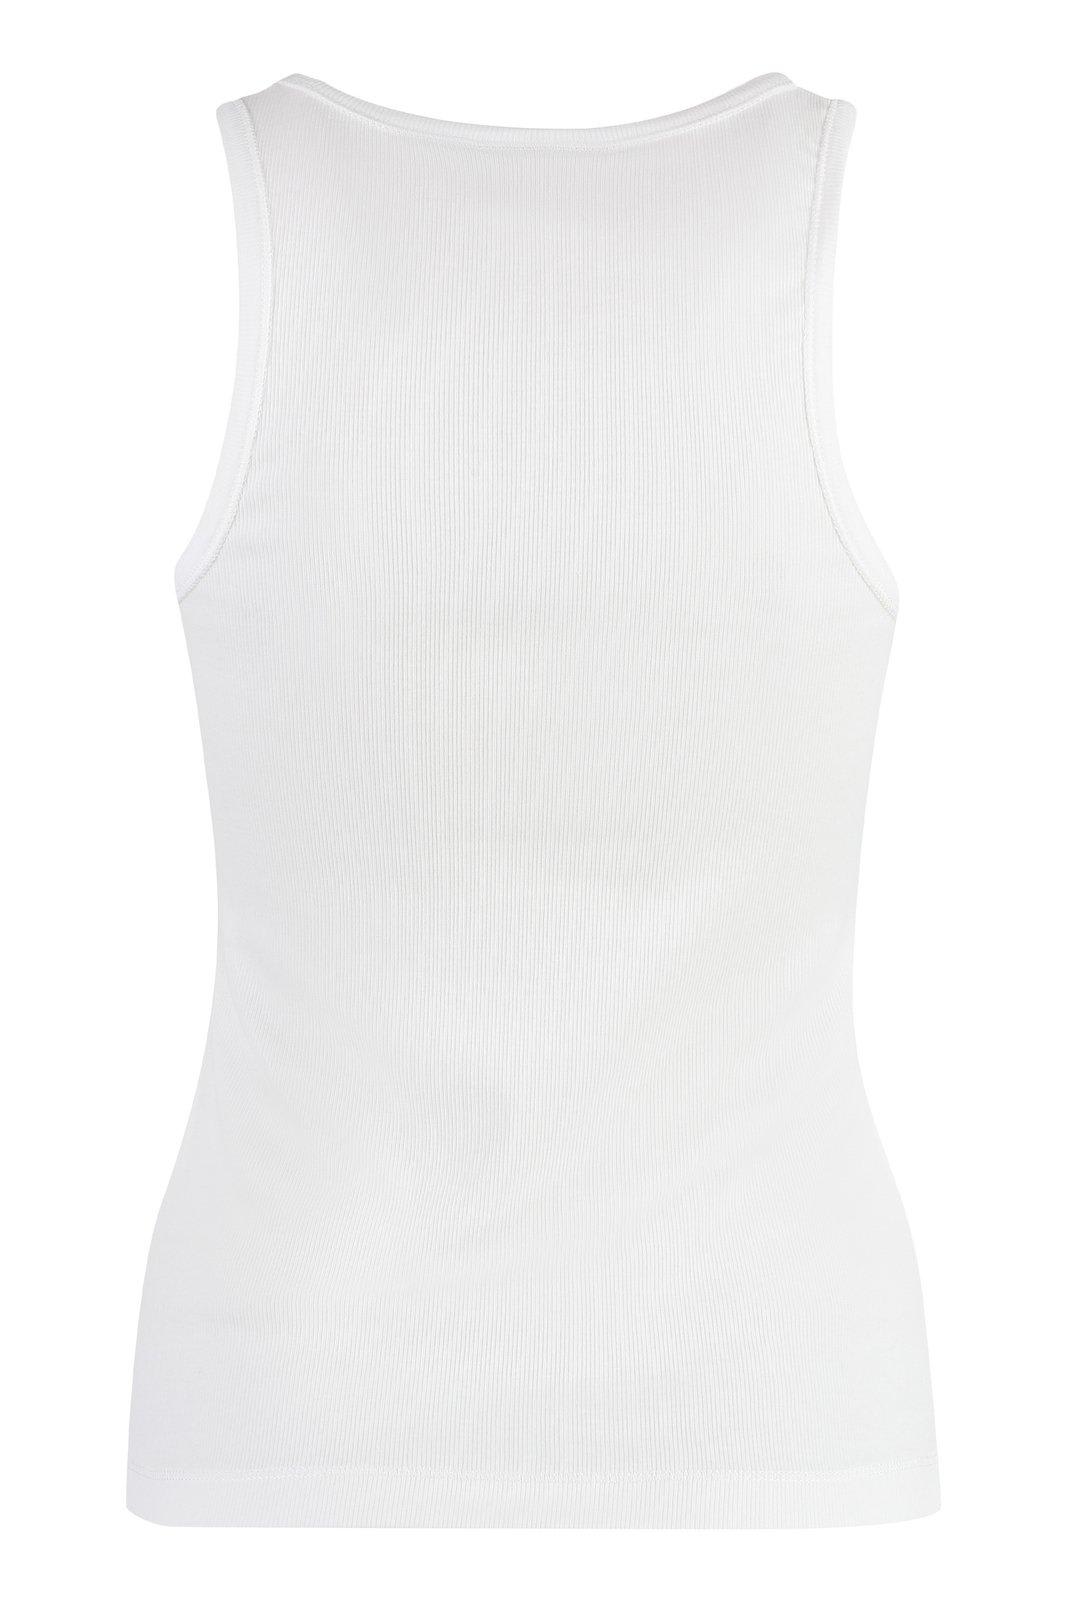 Shop Ganni Logo Fitted Tank Top In White